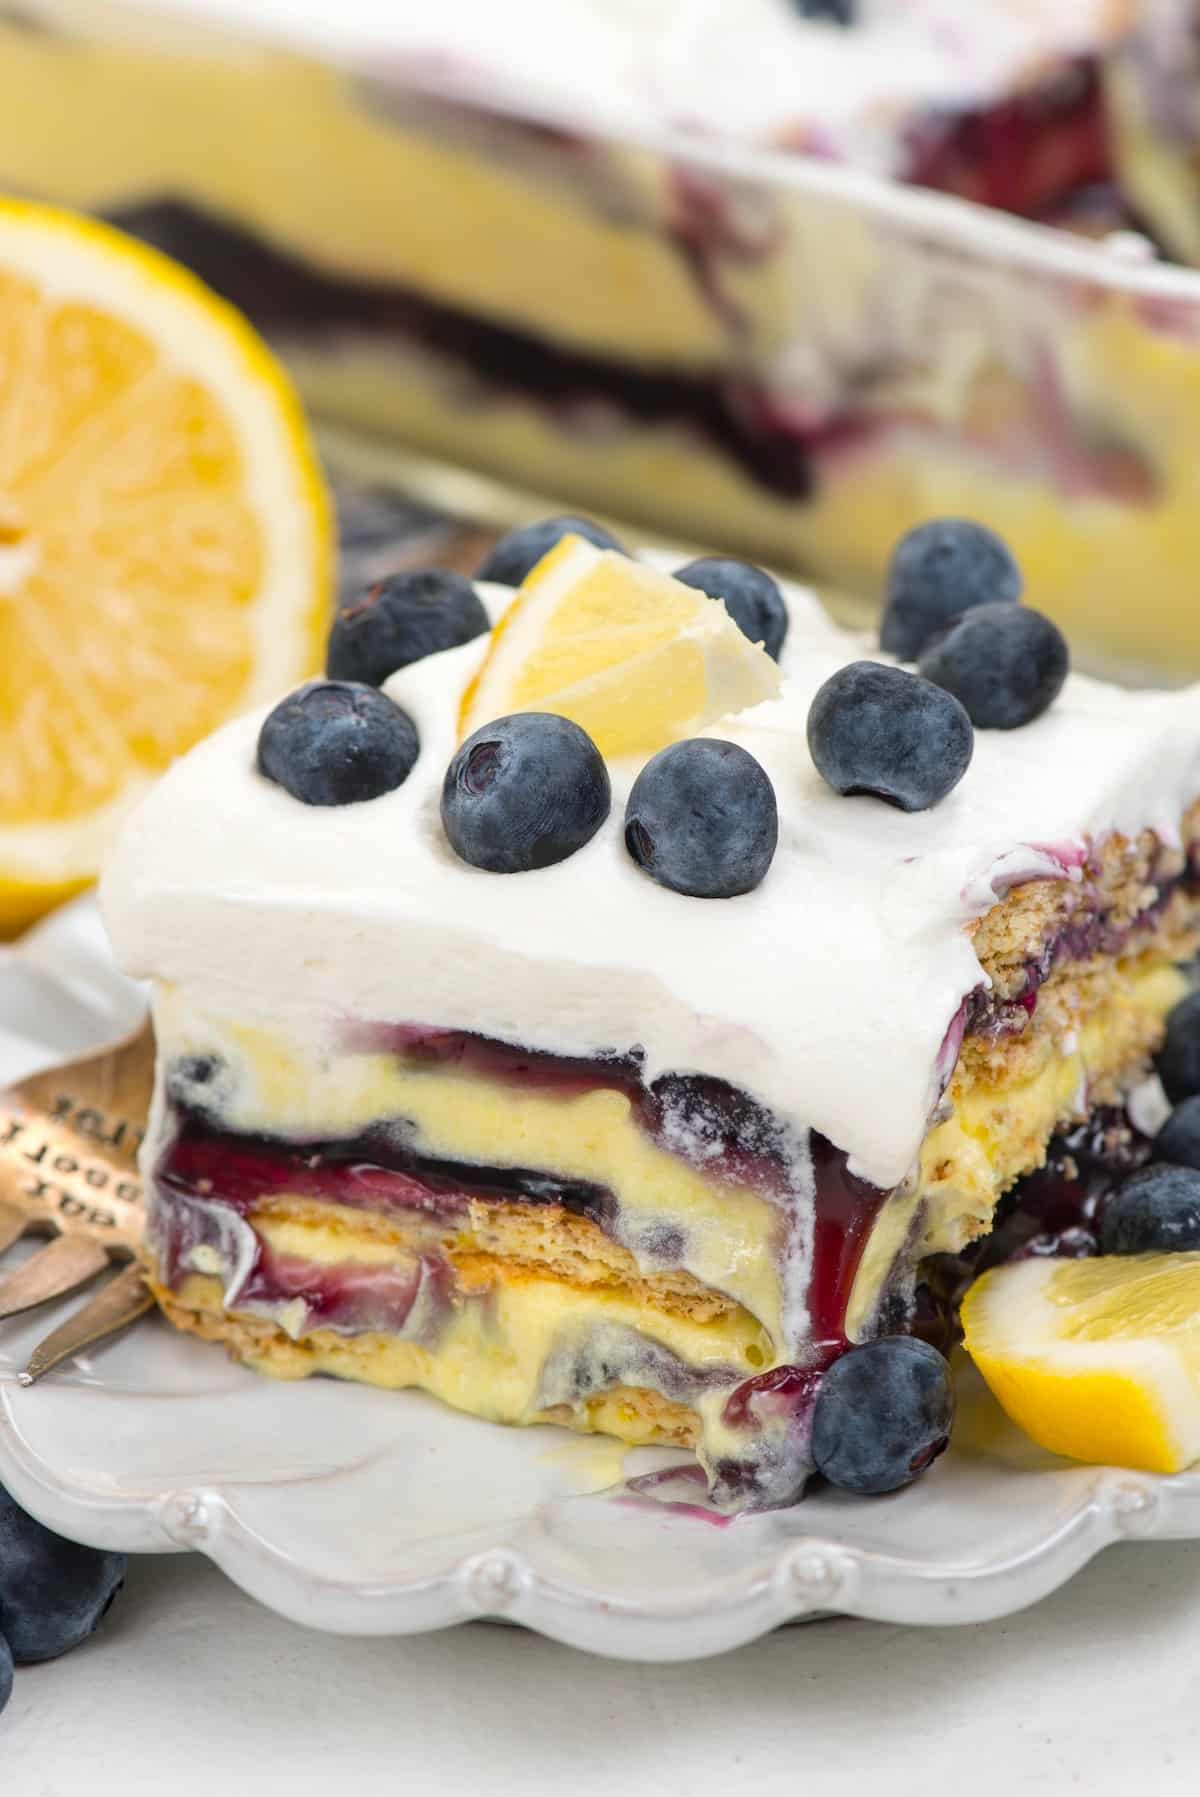 square slice of cake with blueberries and lemons on top.